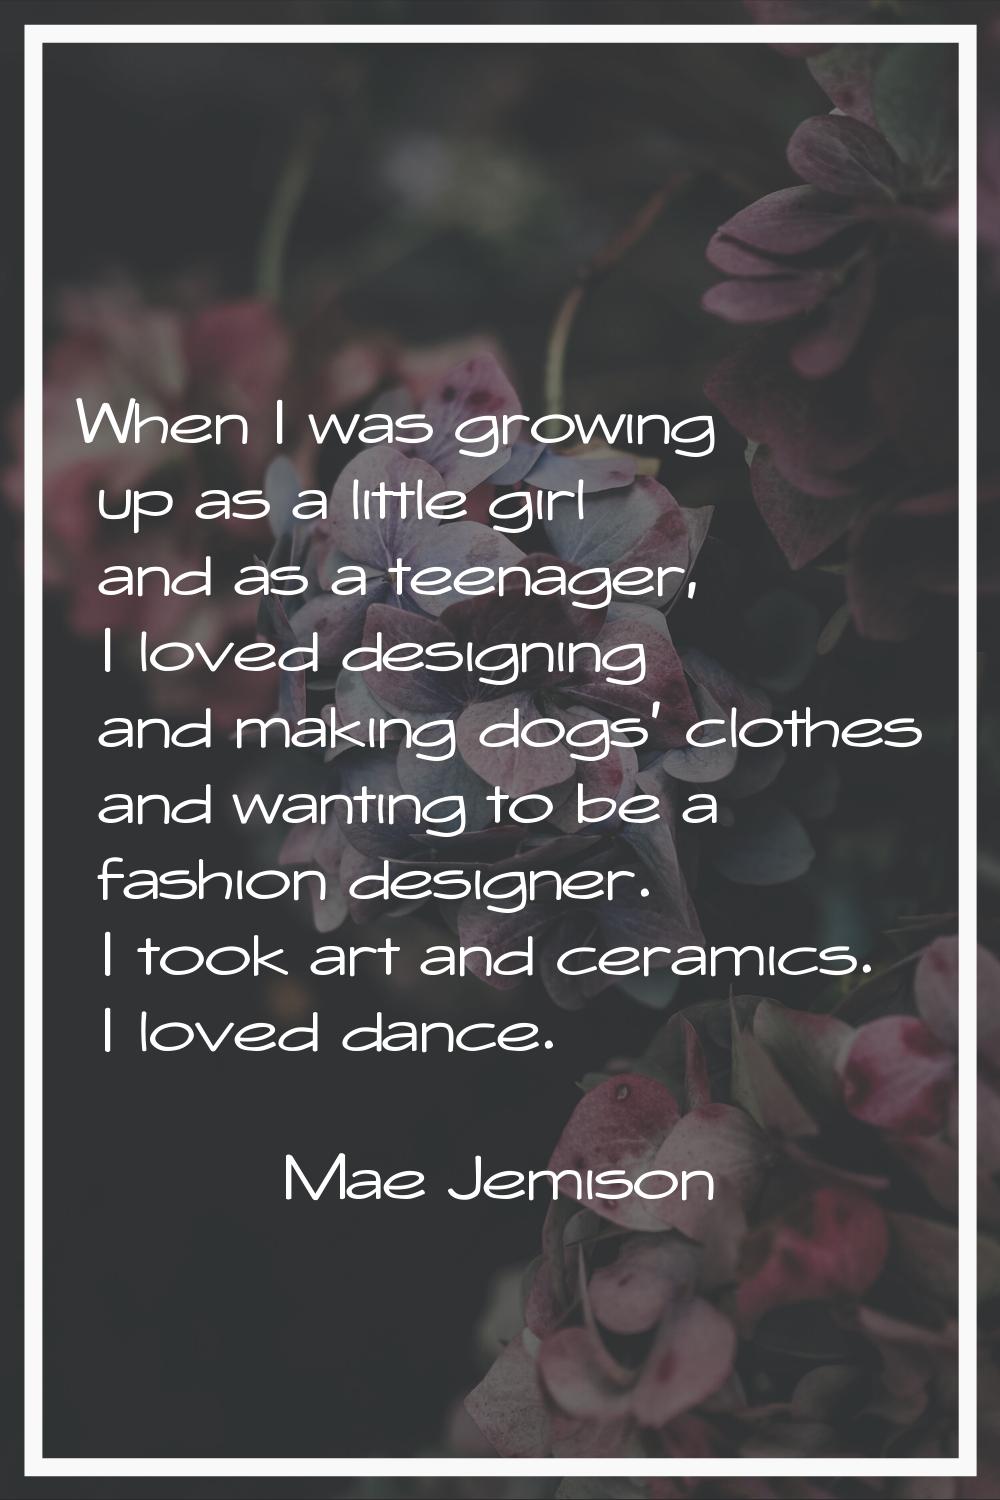 When I was growing up as a little girl and as a teenager, I loved designing and making dogs' clothe